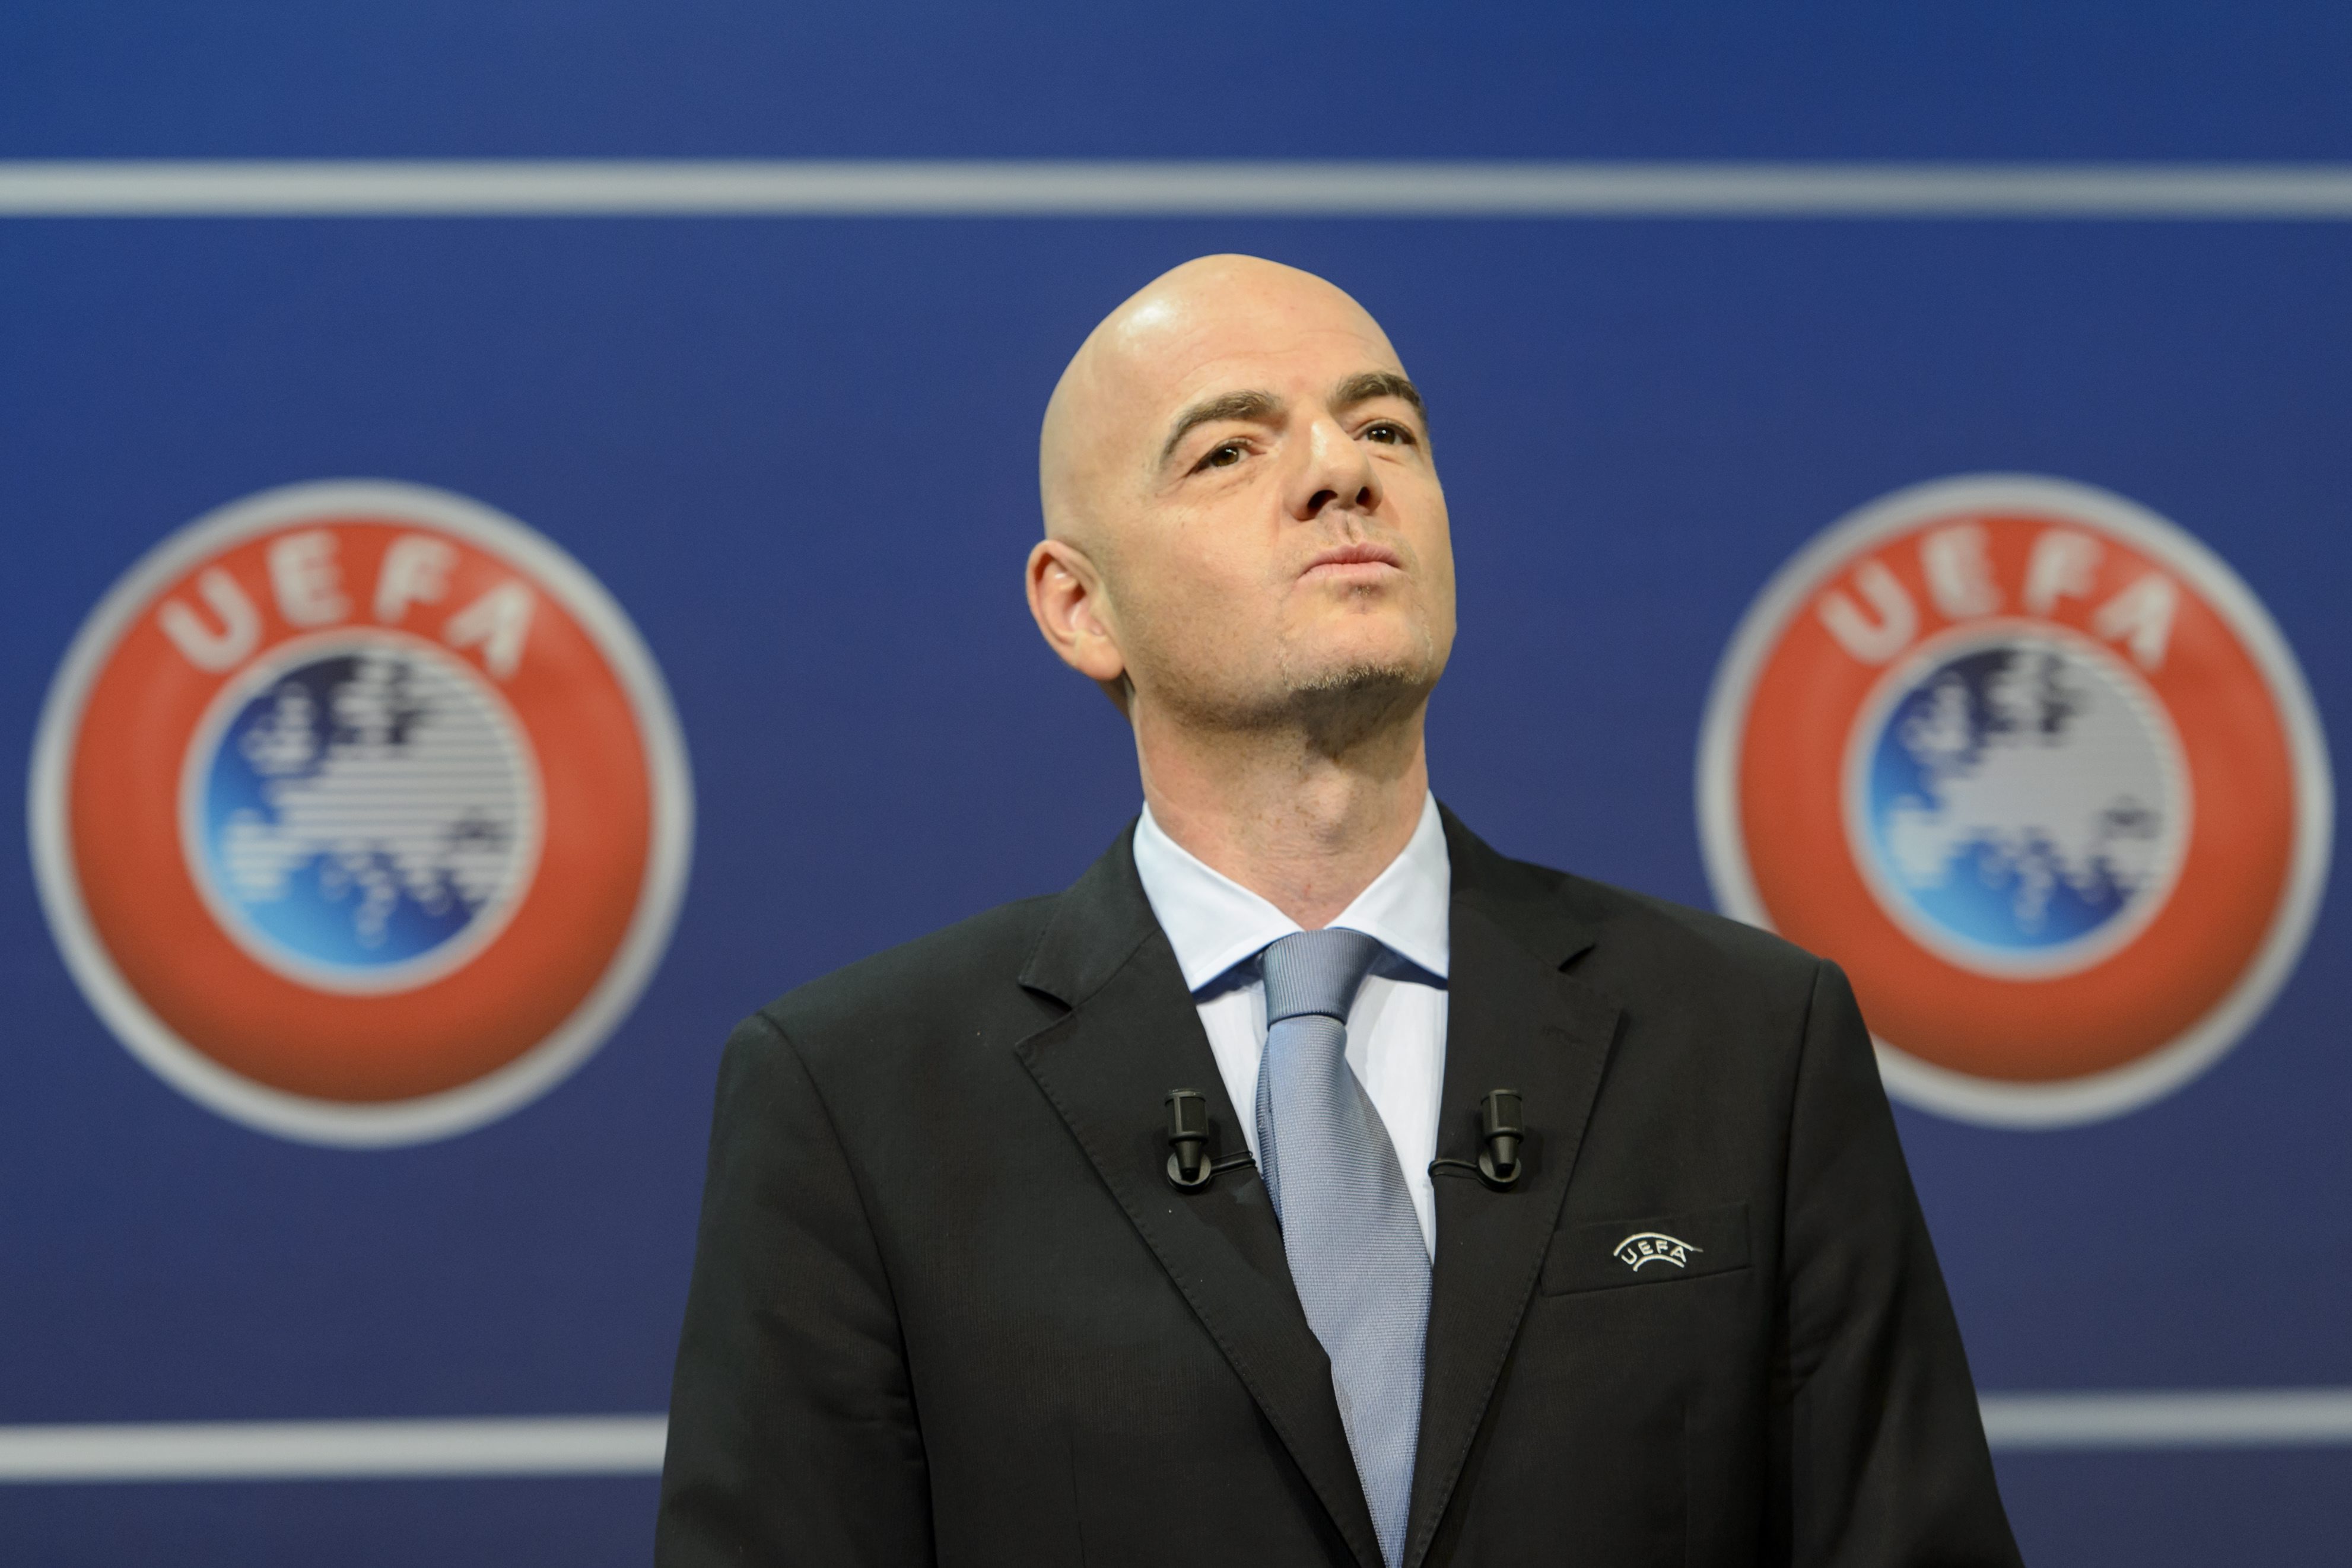 Uefa general secretary Gianni Infantino has the full backing of the European governing body to make a bid to become the next president of Fifa. Photo: EPA